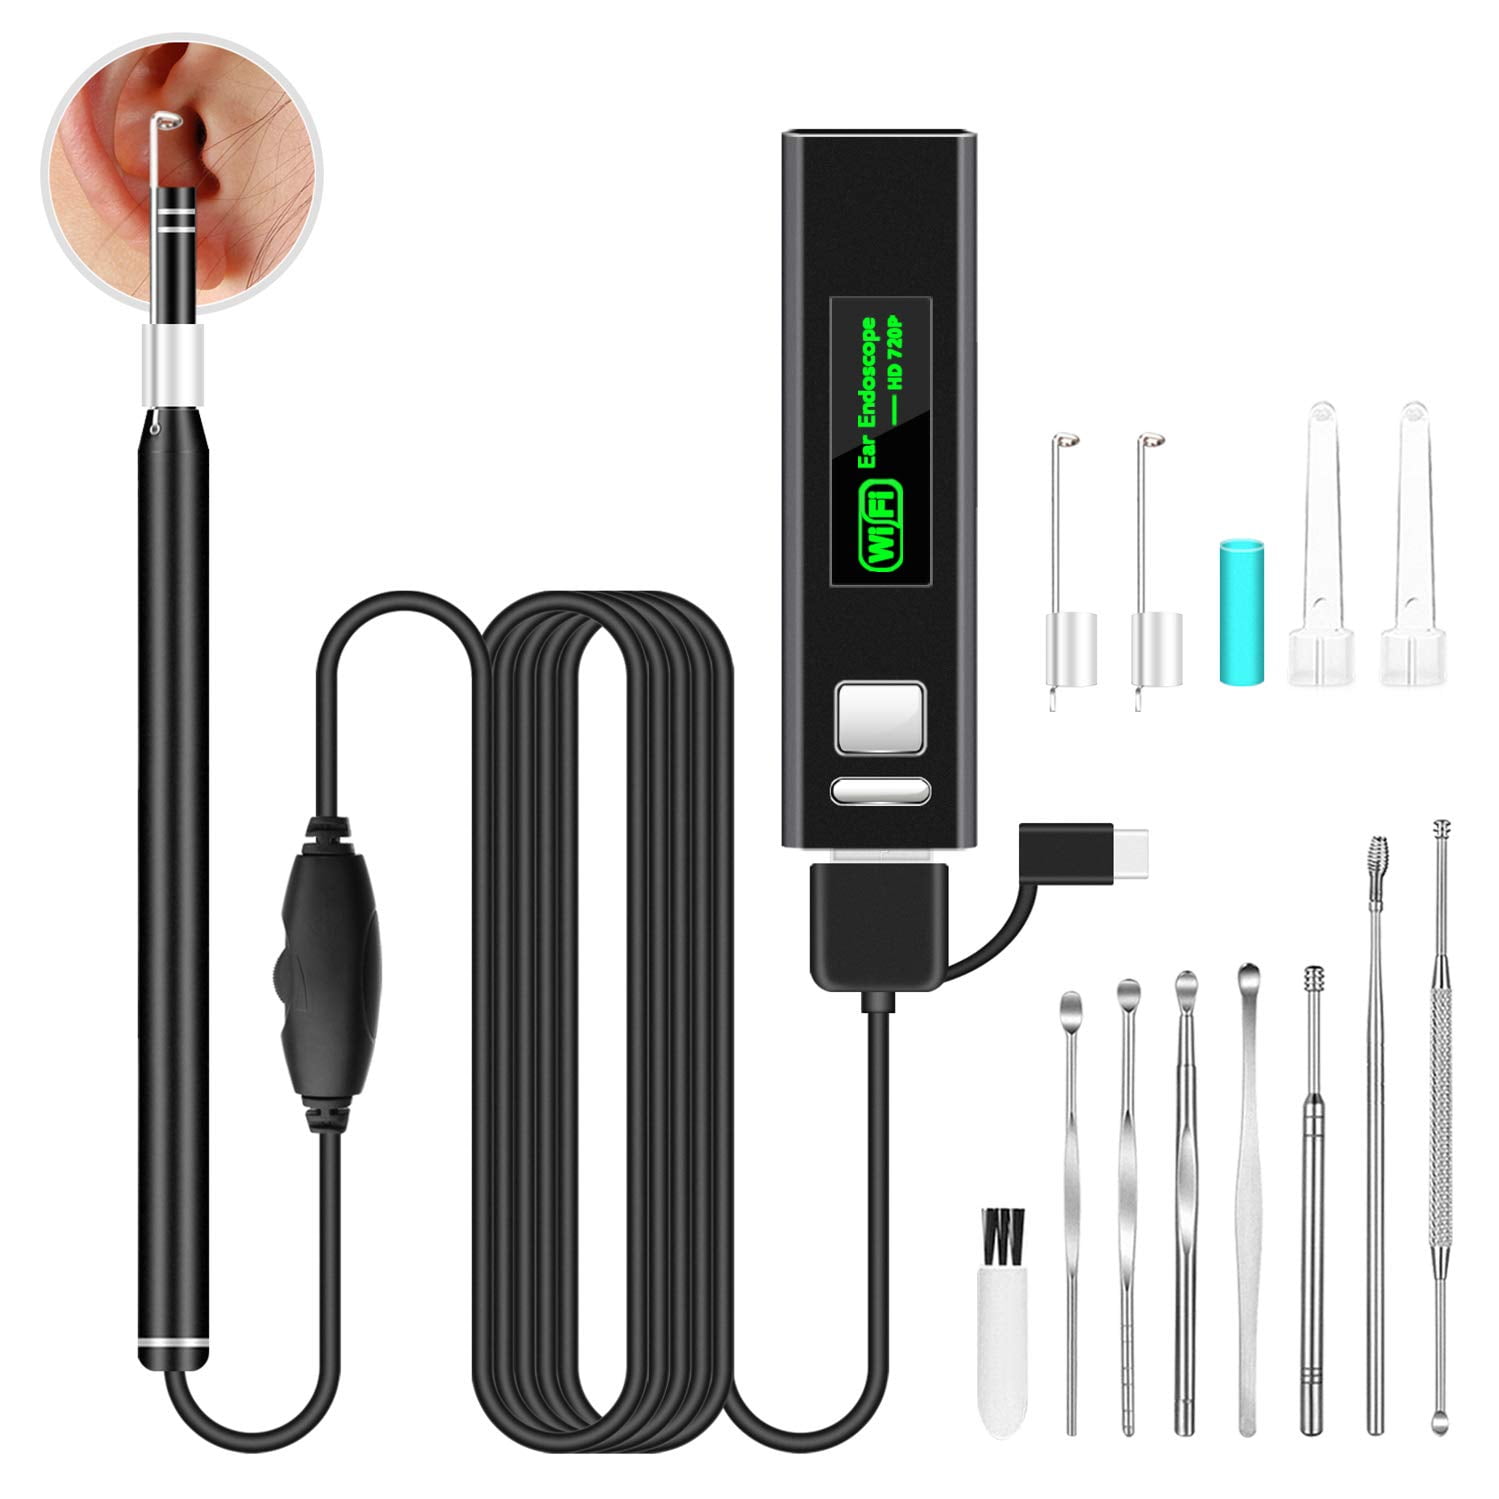 Built in WiFi Wireless Ear Otoscope Inspection Camera Ear Wax Cleaning Tool Ear Pick Spoon with 6 Led Light DINGUIER Borescope for iPhone Android Smartphone iPad Wireless Otoscope WiFi Ear Endoscope 